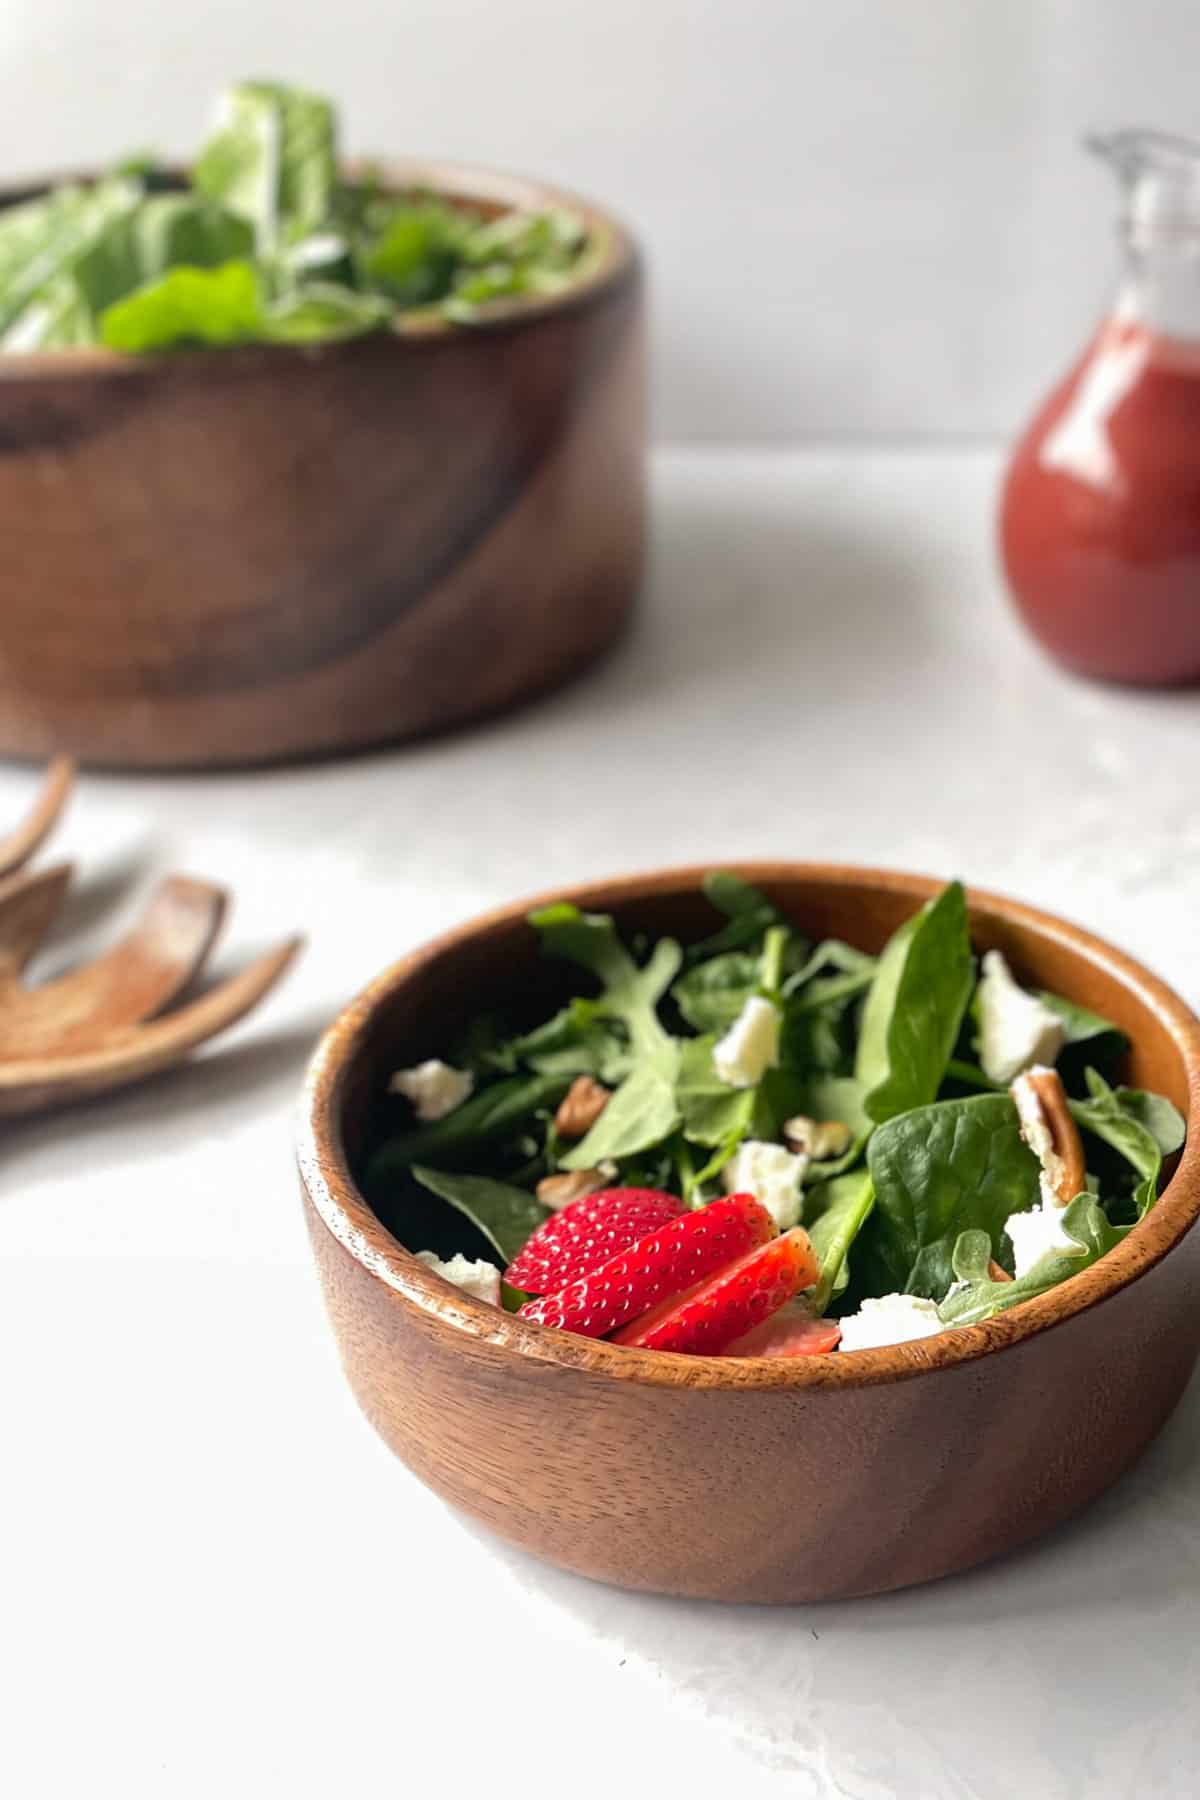 small bowl of arugula spinach salad with strawberries and goat cheese next to salad bowl with greens and tongs and jar of cherry salad dressing.